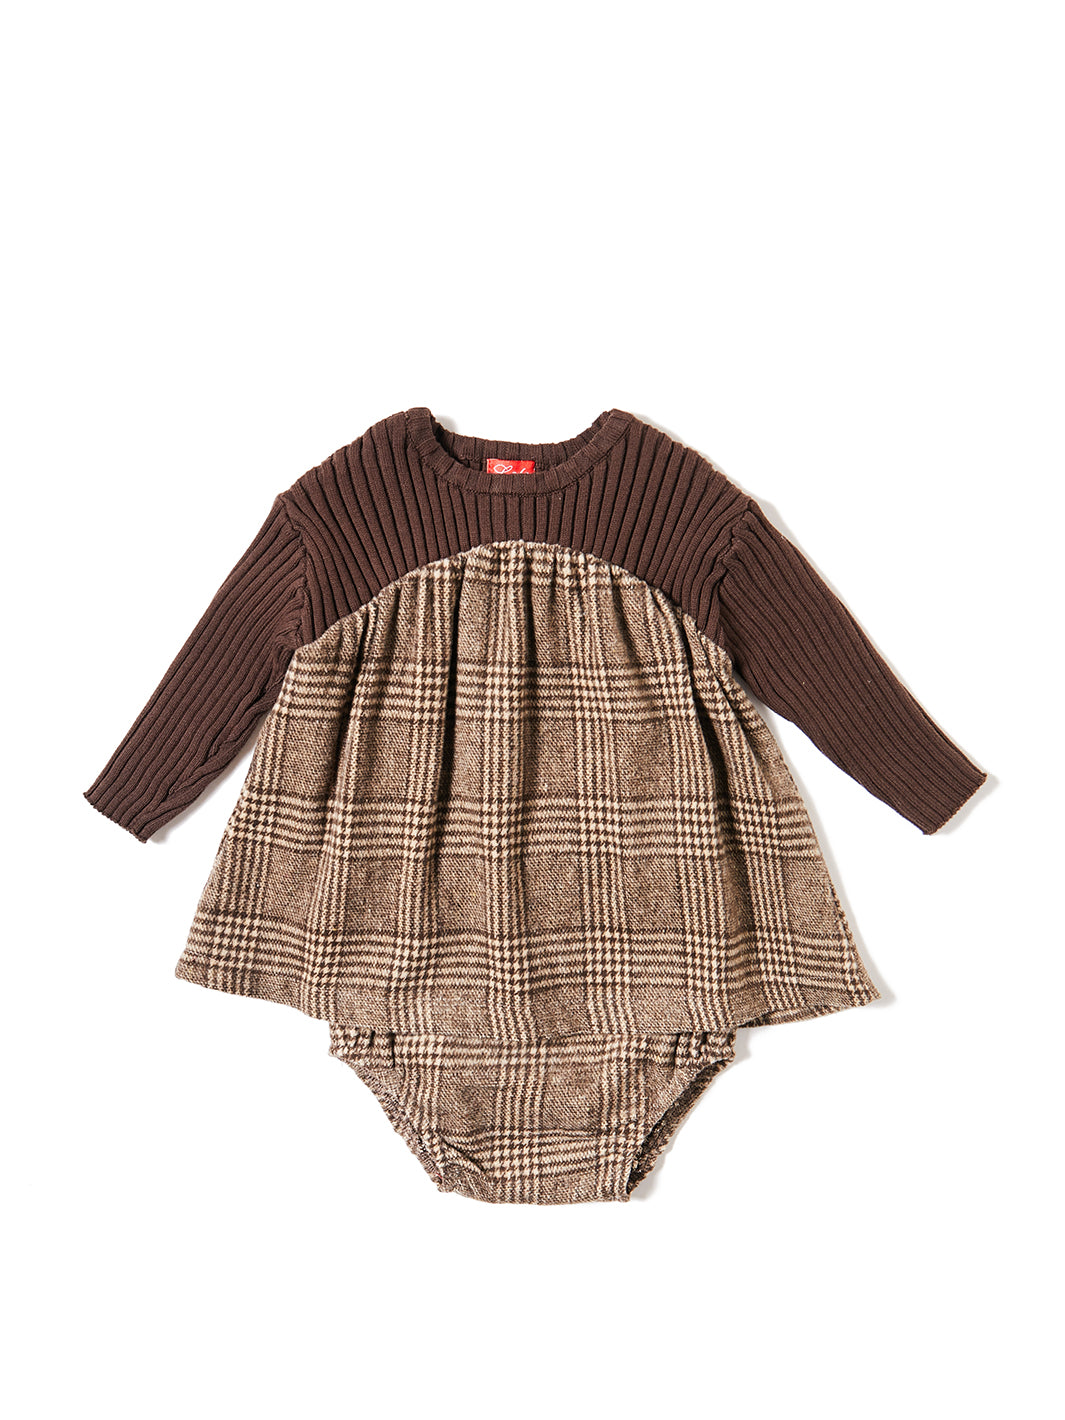 Brushed Plaid Knit Combo 2 Pc. - Brown